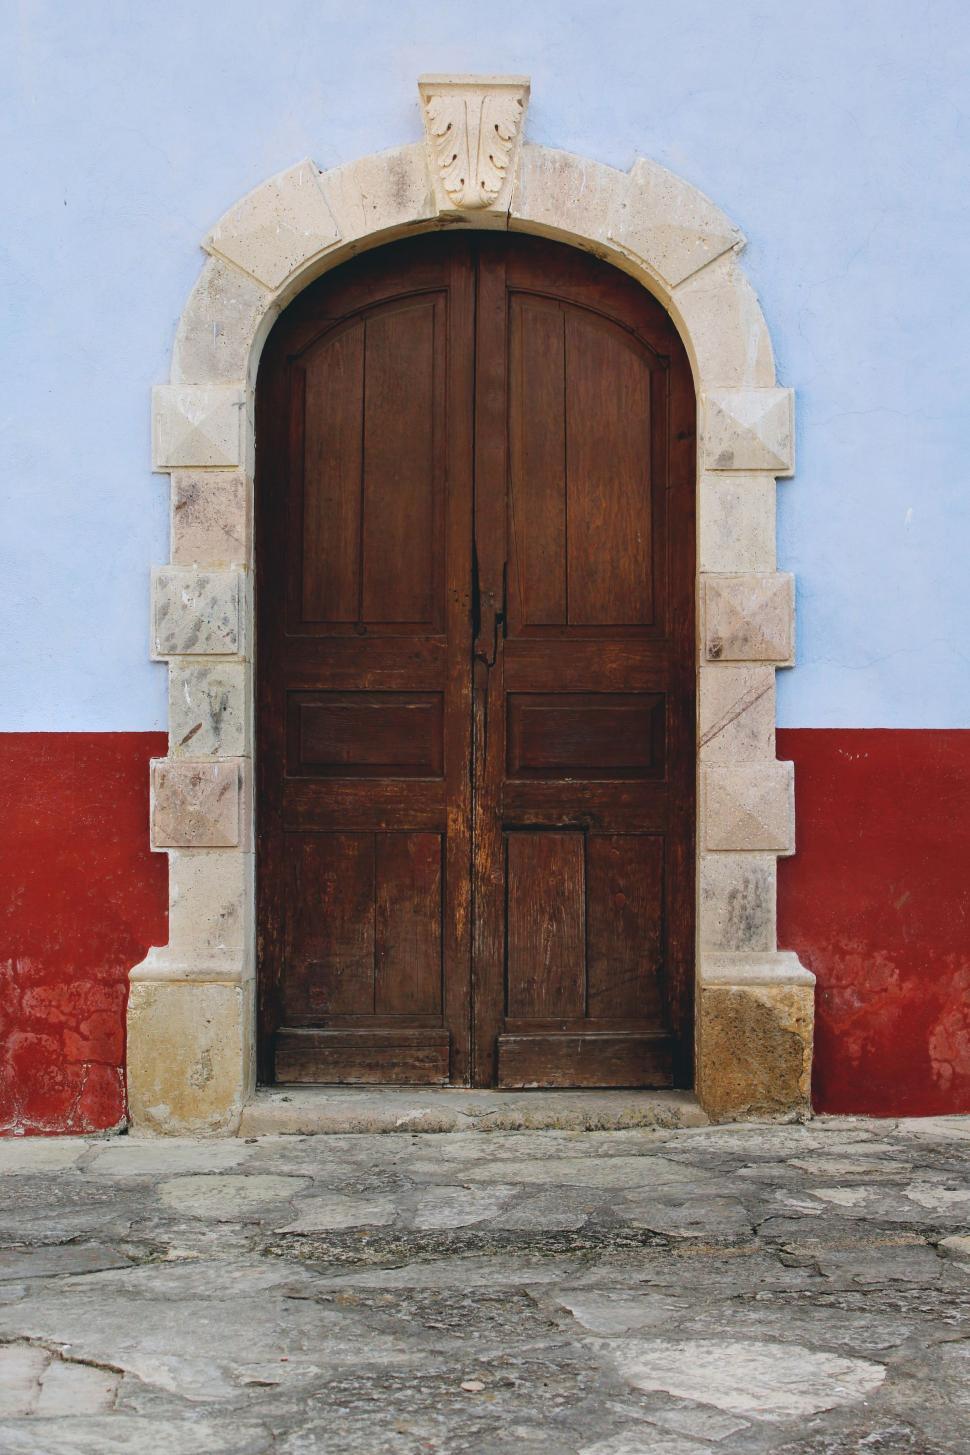 Free Image of Large Wooden Door Against Blue and Red Wall 